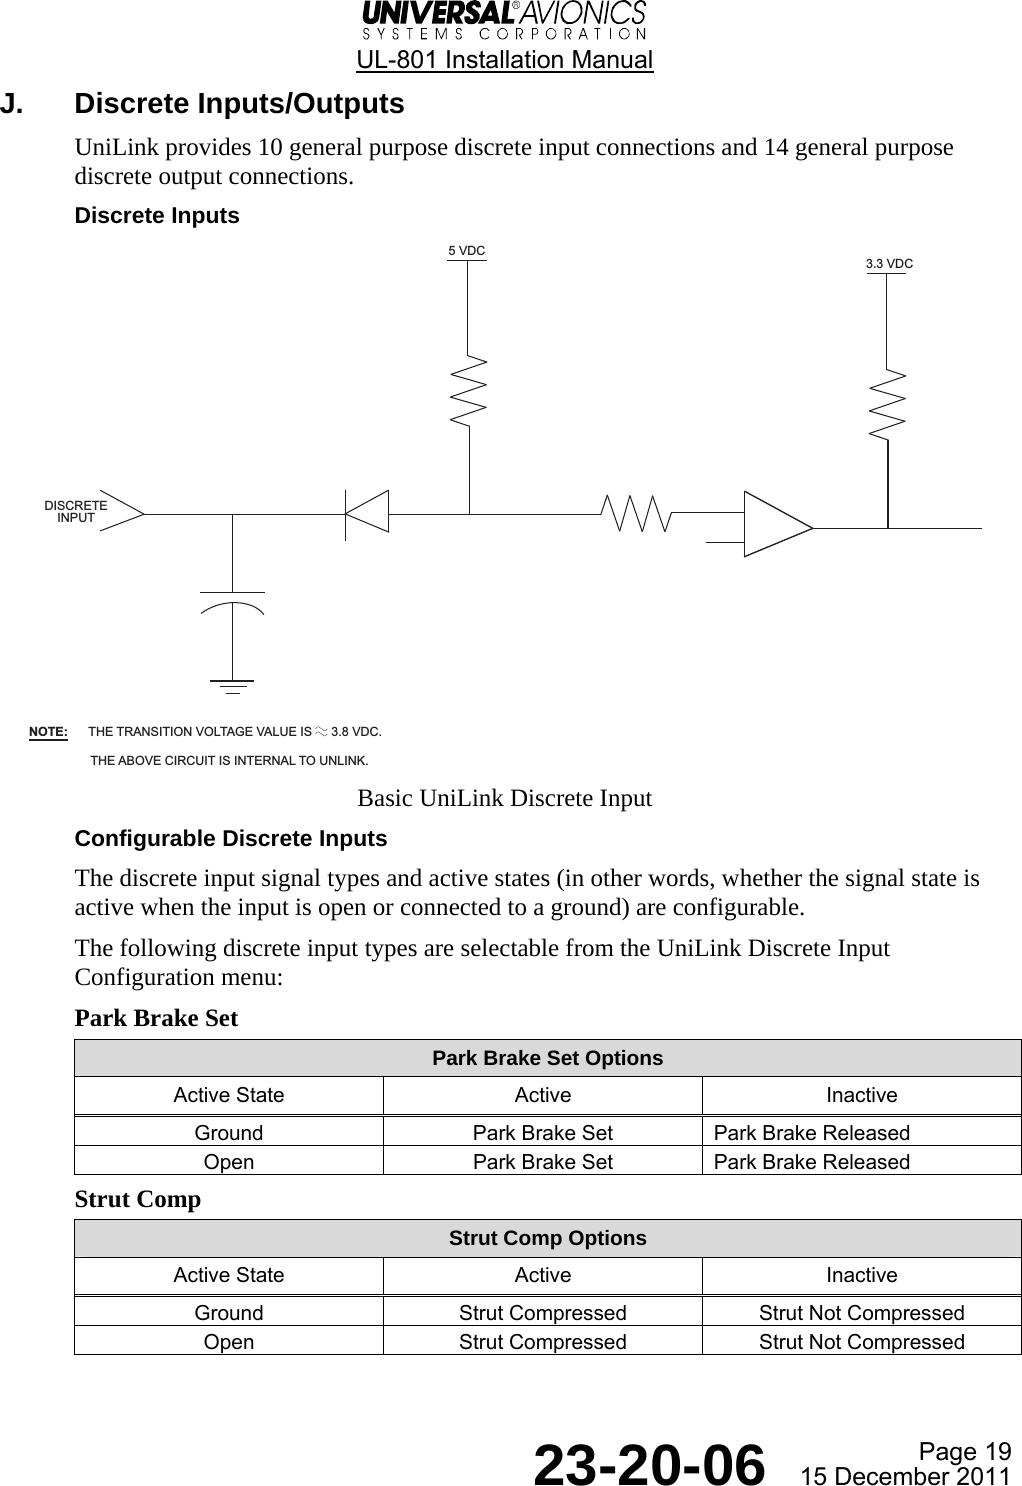  UL-801 Installation Manual  Page 19  23-20-06  15 December 2011 J. Discrete Inputs/Outputs UniLink provides 10 general purpose discrete input connections and 14 general purpose discrete output connections. Discrete Inputs  Basic UniLink Discrete Input Configurable Discrete Inputs The discrete input signal types and active states (in other words, whether the signal state is active when the input is open or connected to a ground) are configurable. The following discrete input types are selectable from the UniLink Discrete Input Configuration menu: Park Brake Set Park Brake Set Options Active State  Active  Inactive Ground  Park Brake Set  Park Brake Released Open  Park Brake Set  Park Brake Released  Strut Comp Strut Comp Options Active State  Active  Inactive Ground  Strut Compressed  Strut Not Compressed Open  Strut Compressed  Strut Not Compressed    5 VDC3.3 VDCDISCRETEINPUTNOTE: THE TRANSITION VOLTAGE VALUE IS   3.8 VDC.THE ABOVE CIRCUIT IS INTERNAL TO UNLINK.